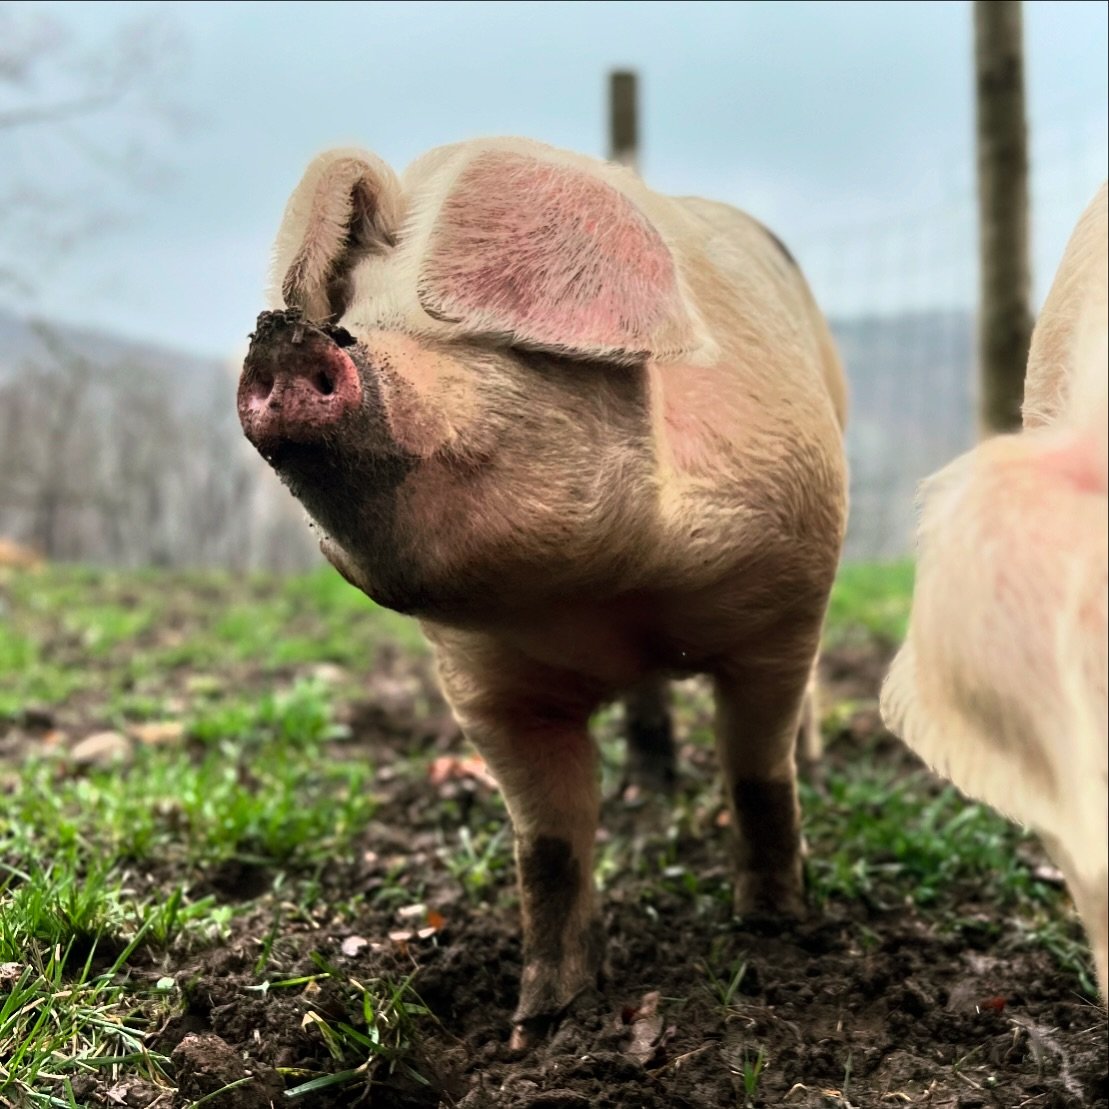 ONLY A FEW SPRING PORK SHARES LEFT. If you are in the Hudson Valley and interested in meat from animals that led happy lives, this note is for you: 

We are now accepting orders for our spring shares (meat harvested this week, ready mid-late June). 
